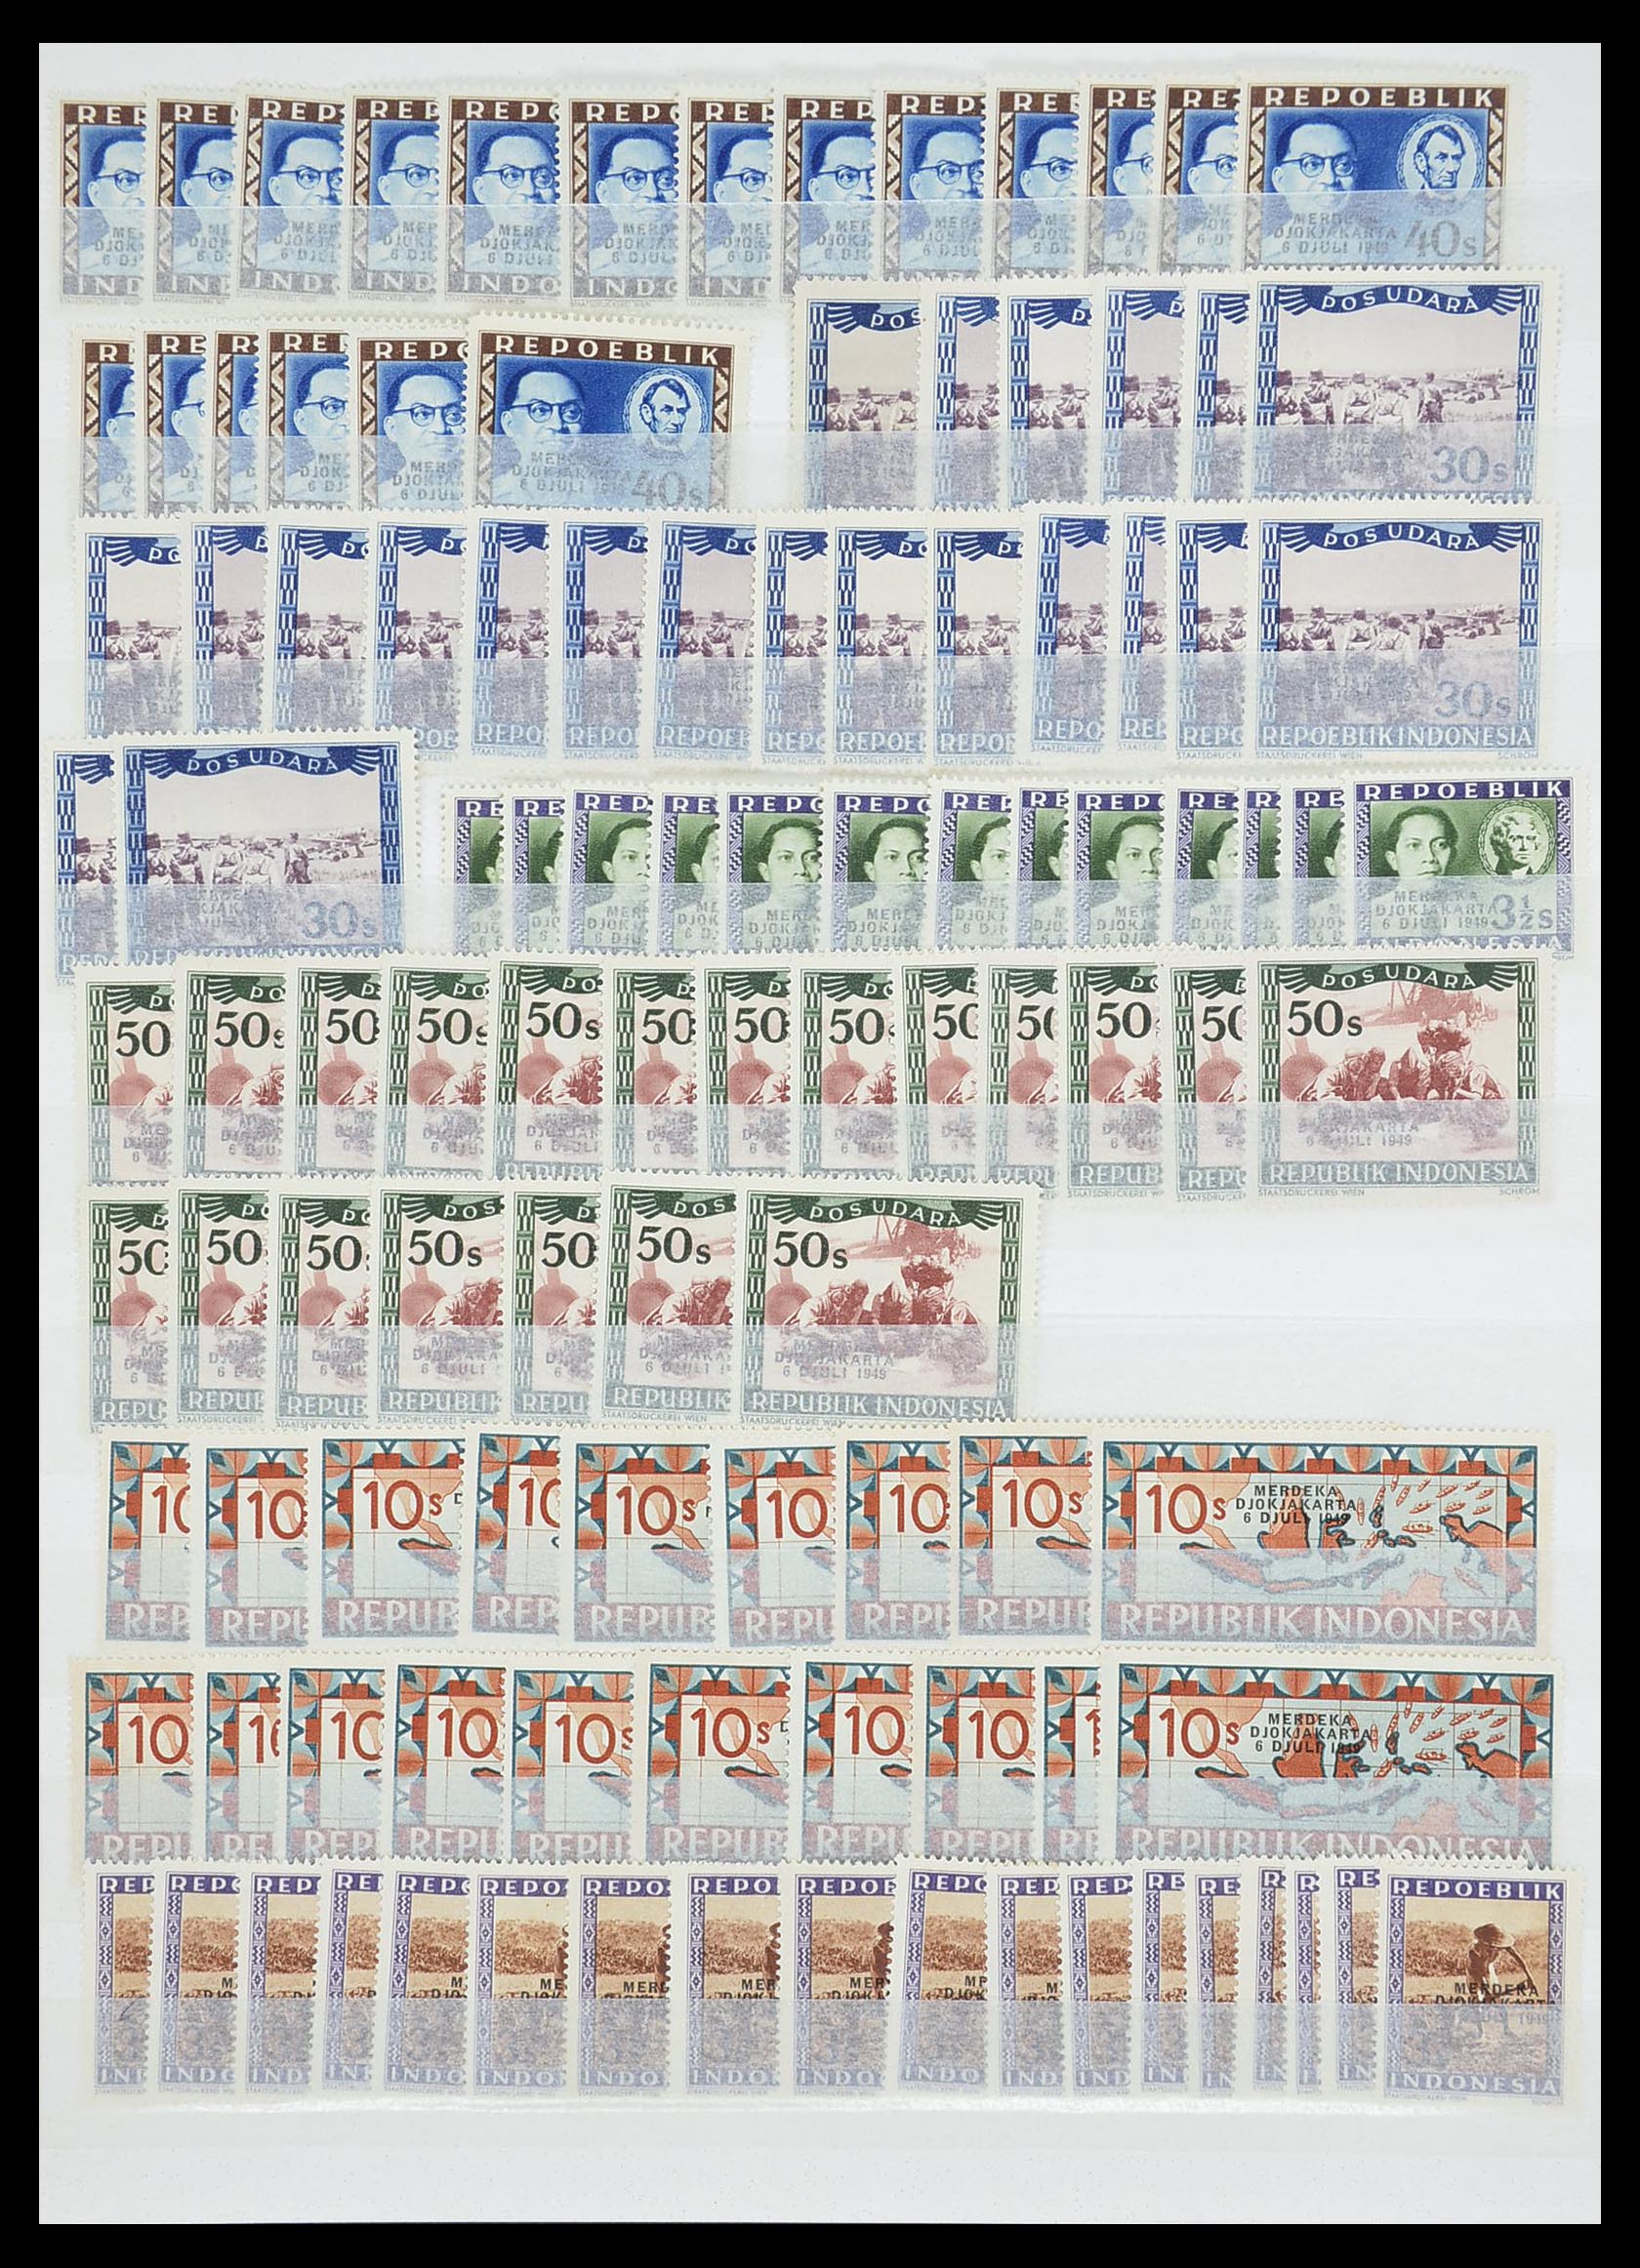 33489 006 - Stamp collection 33489 Japanese occupation Dutch east Indies and interim